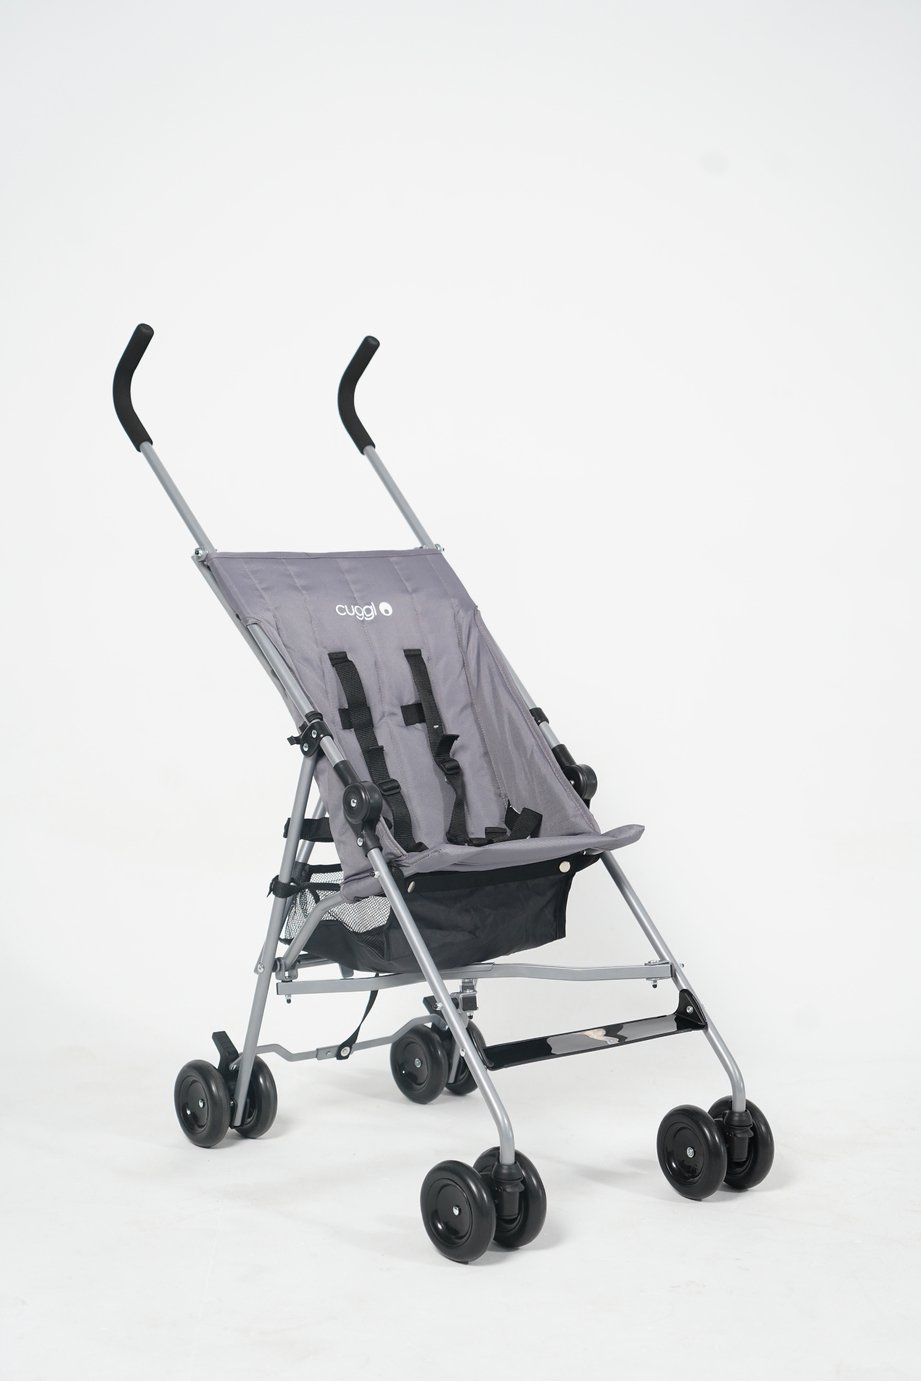 Cuggl Birch Stroller Buggy Grey Holiday Buggy Compact Folding Great Value